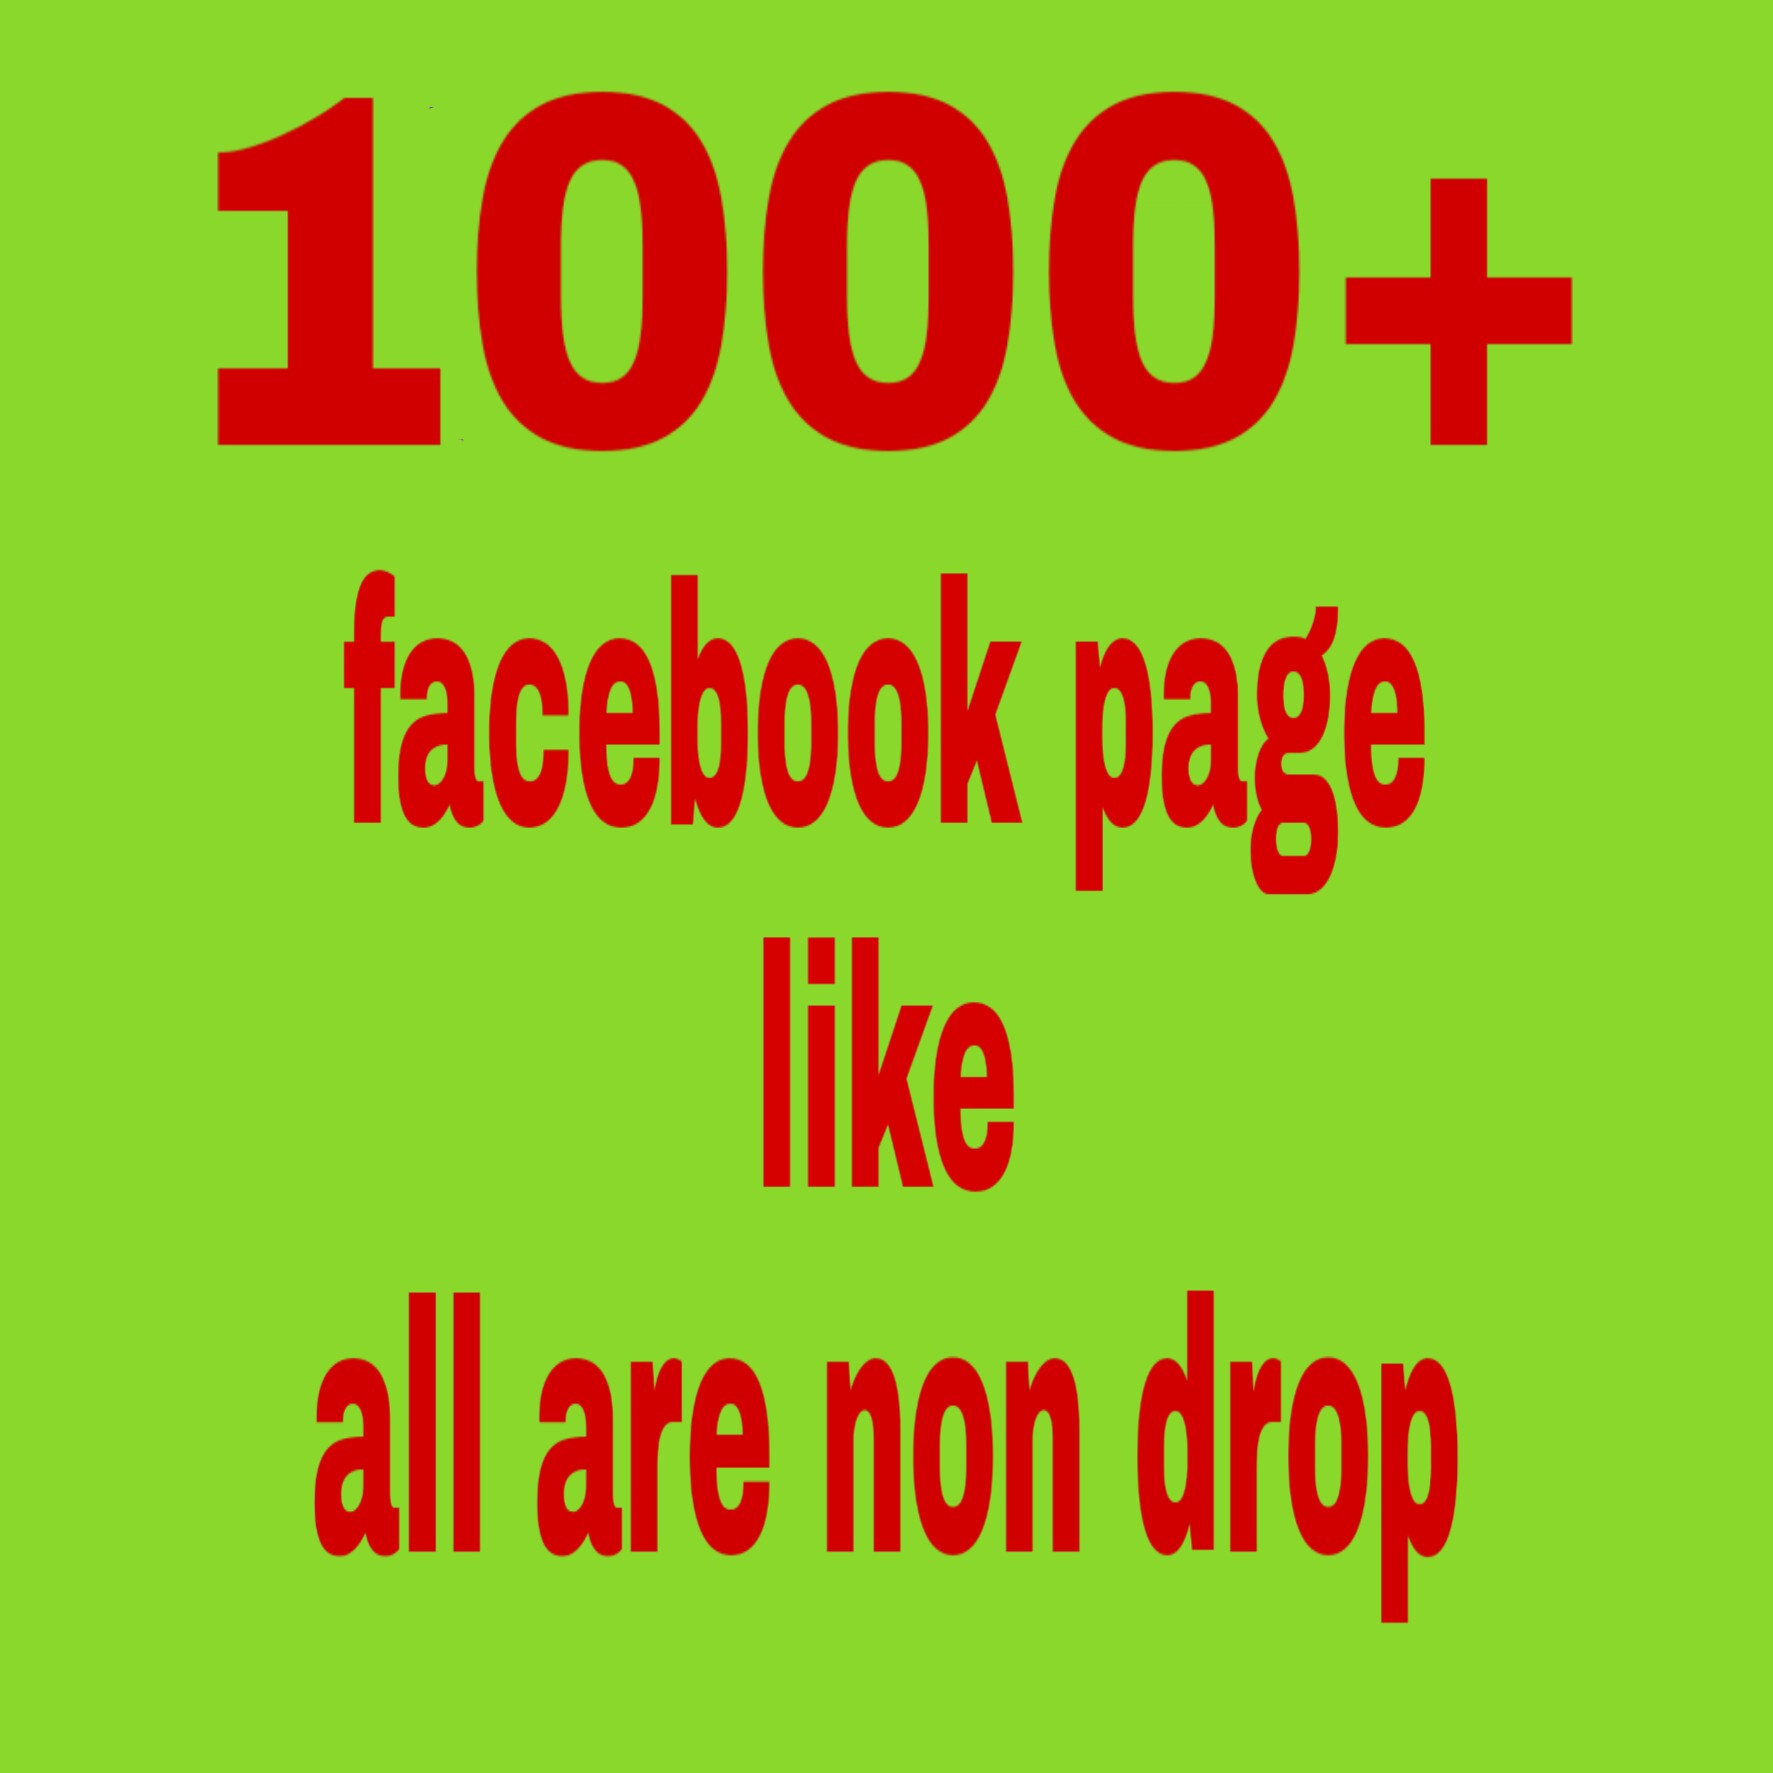 1000 facebook page like all are non drop